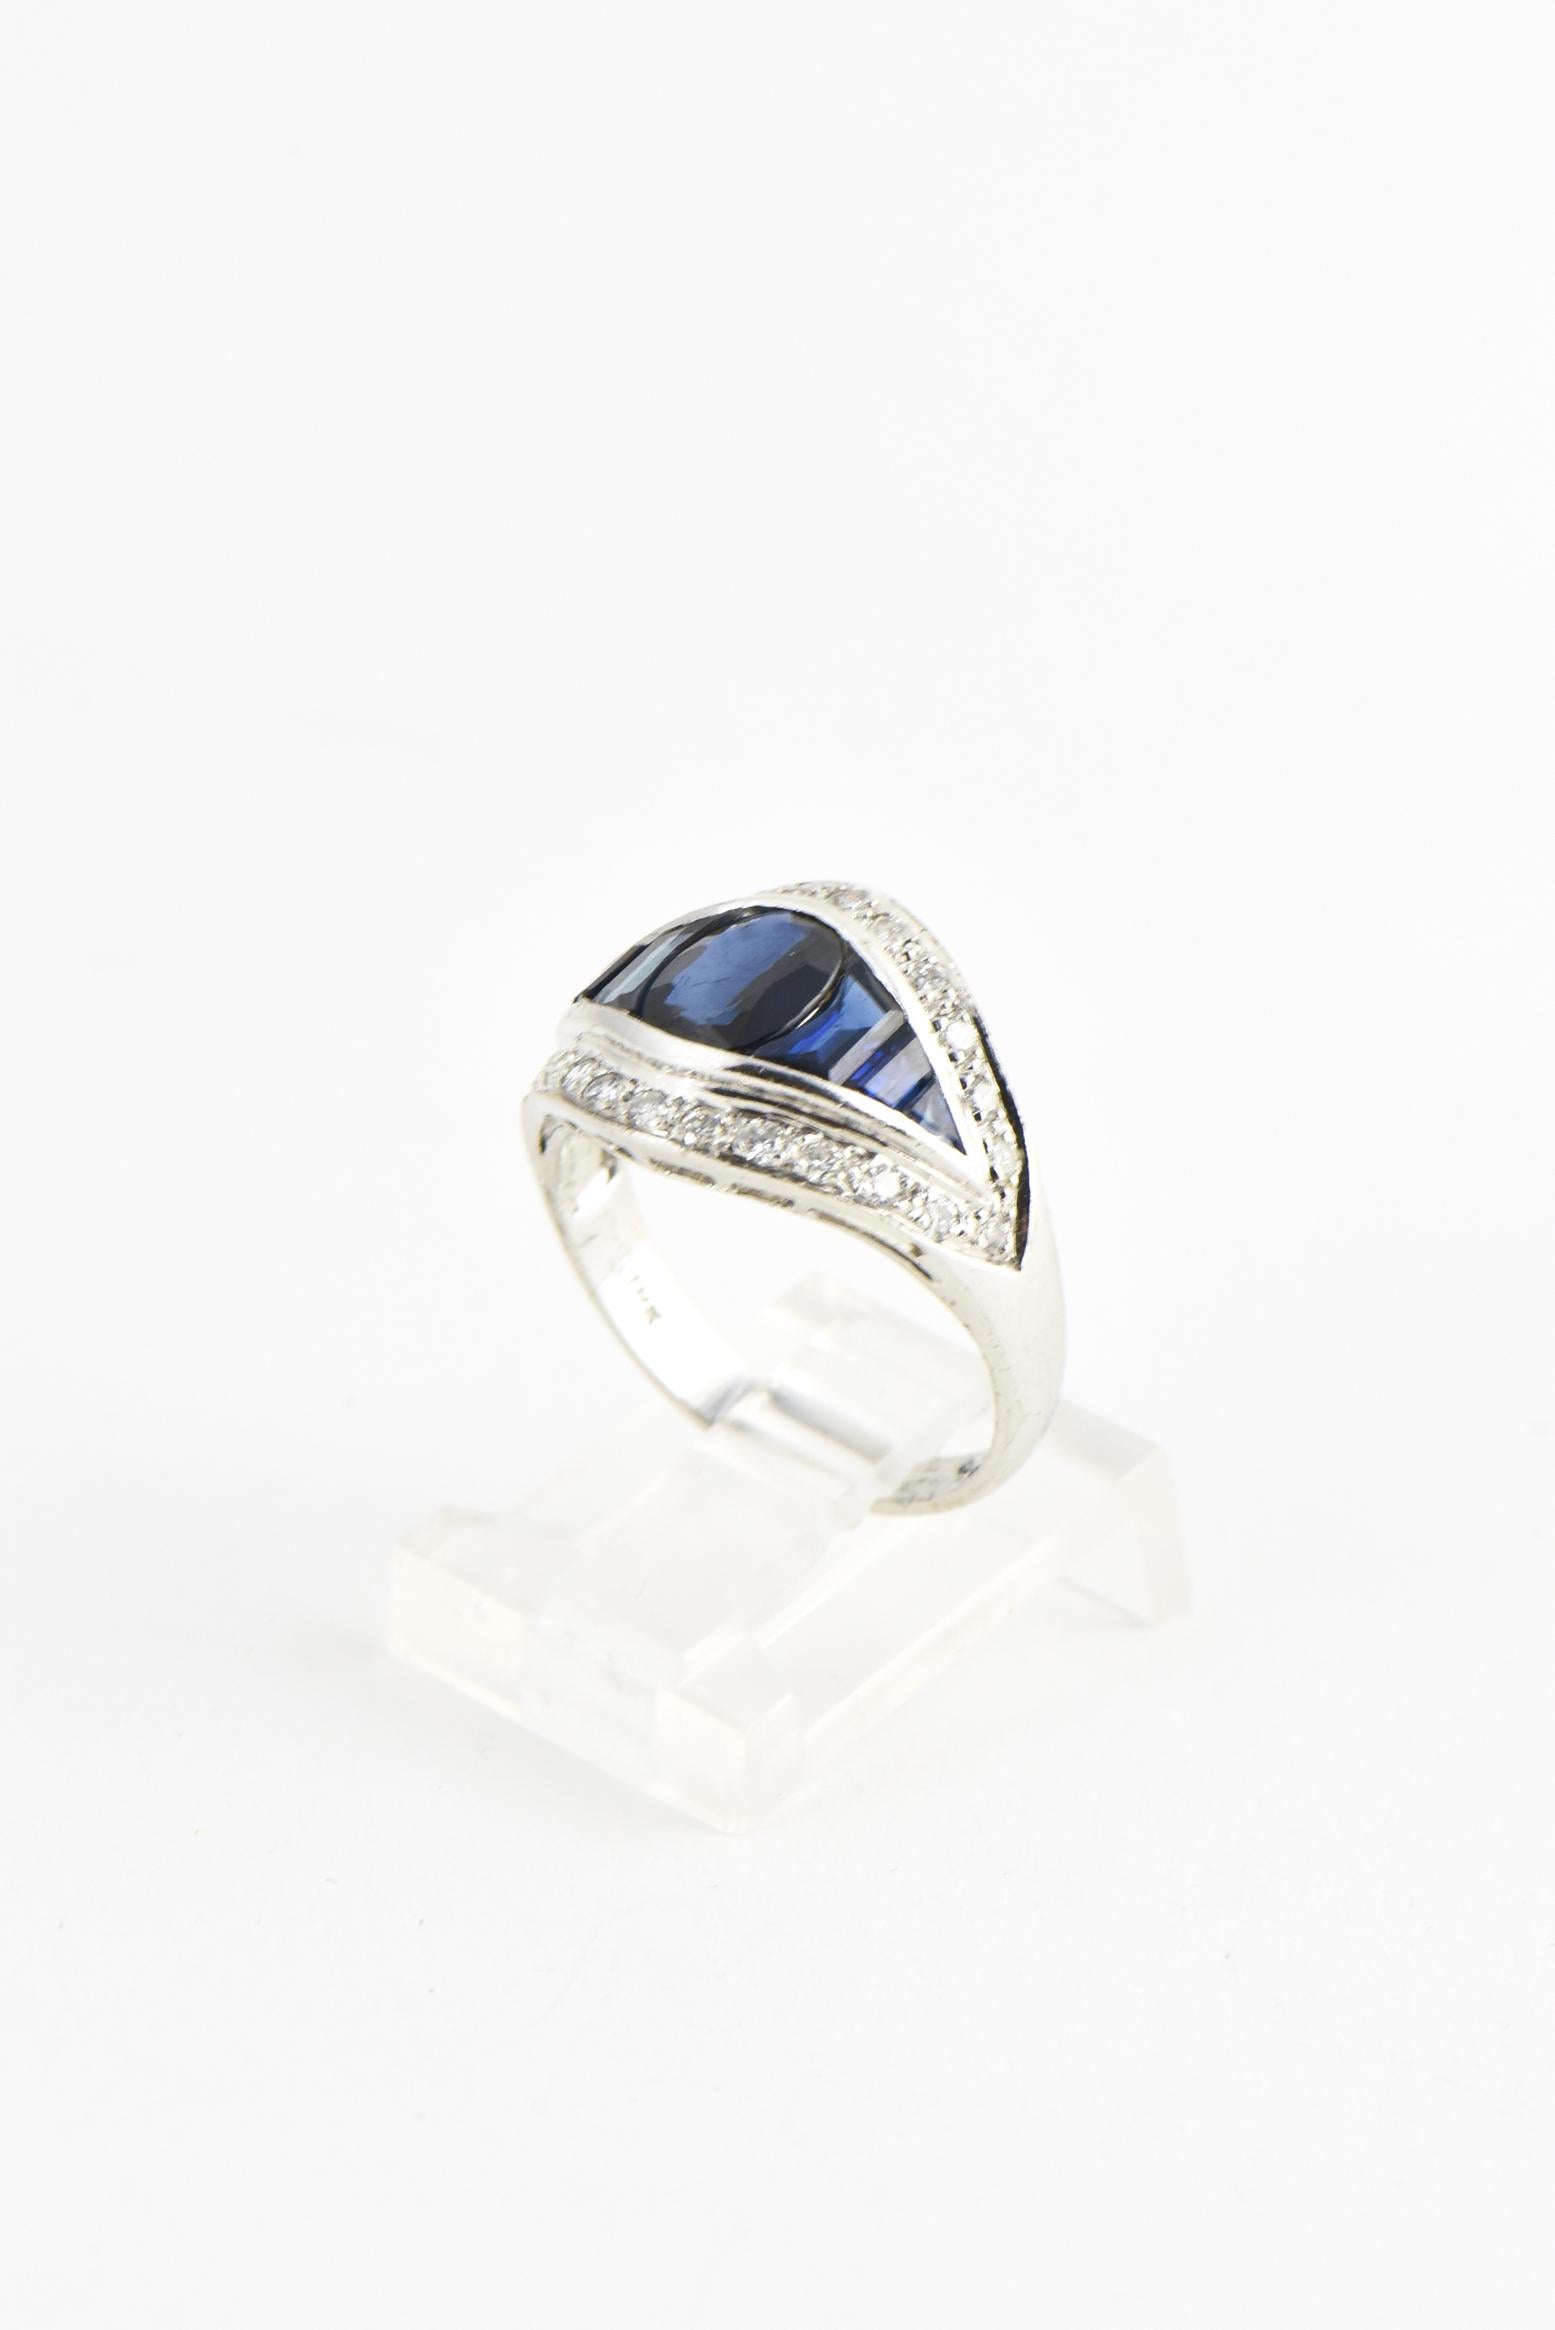 Deco Style Sapphire and Diamond White Gold Ring In Good Condition For Sale In Miami Beach, FL